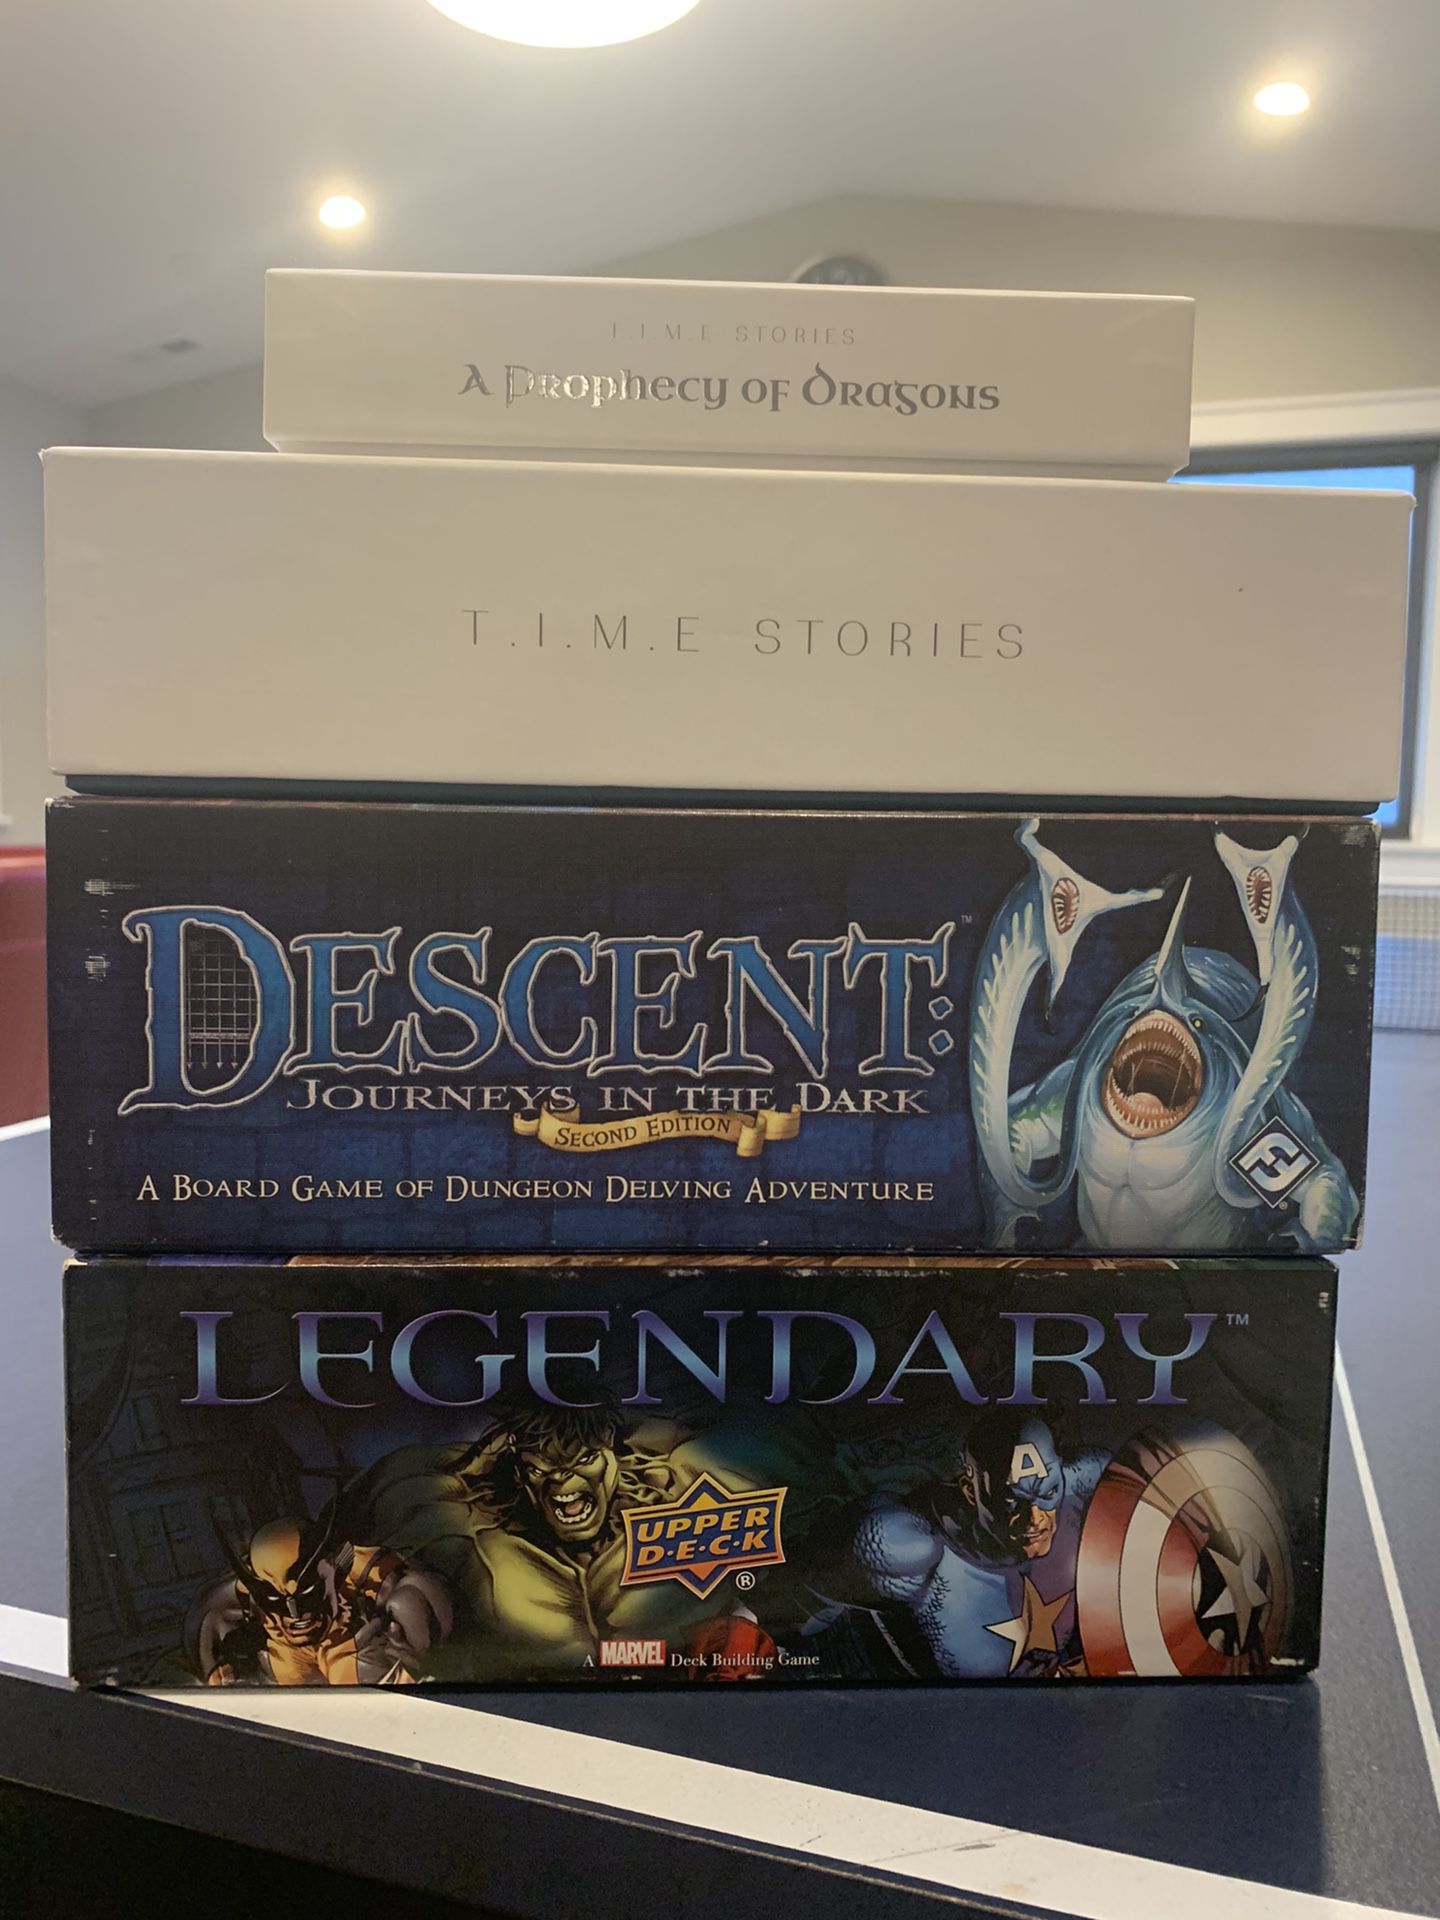 Board Games: Time Stories + A Prophecy Of Dragons expansion, Descent: Journies in the Dark (2nd edition), Legendary